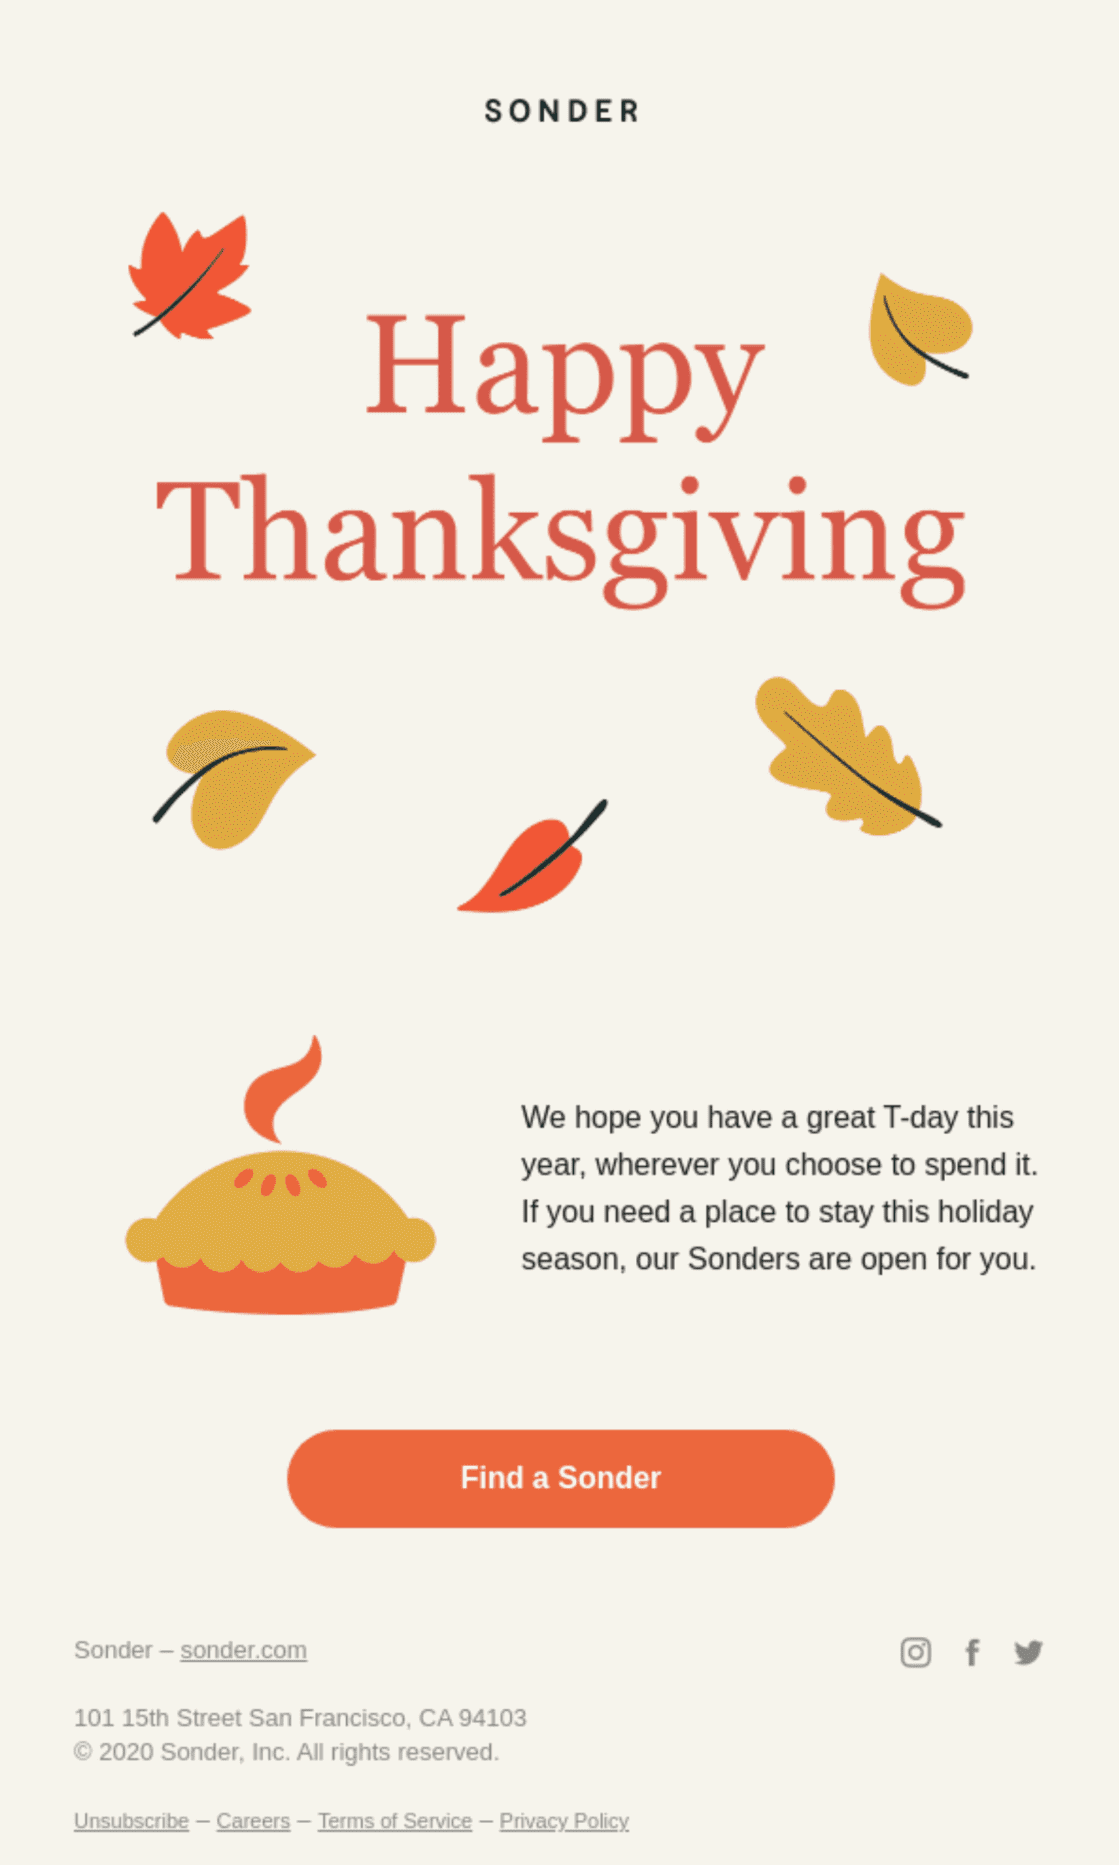 A Thanksgiving email with one short paragraph of text and a button to access the website